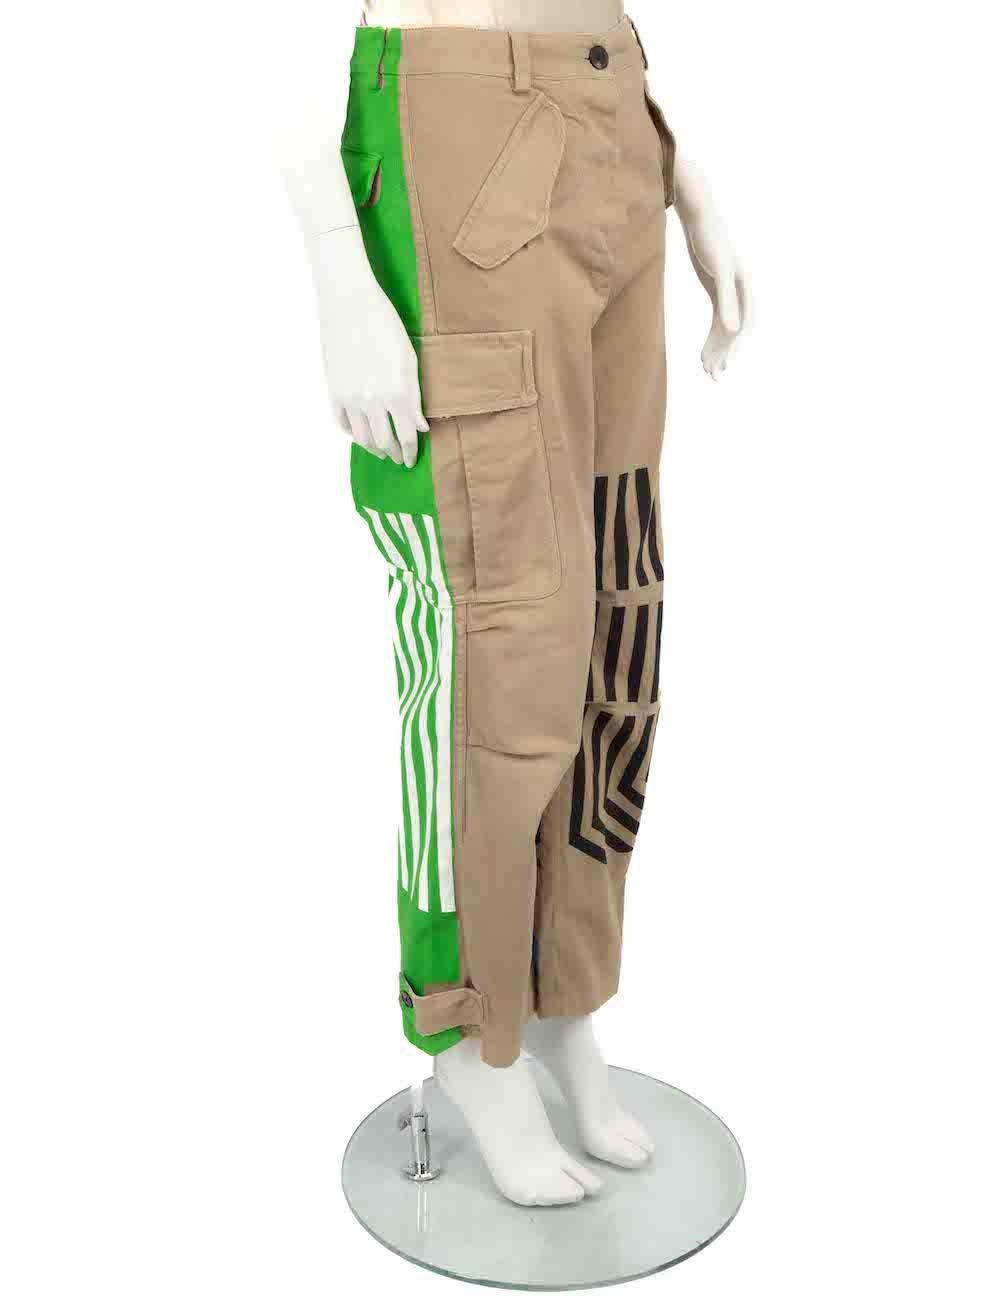 CONDITION is Never worn. No visible wear to trousers is evident on this new Dior designer resale item.

Details
2022
Khaki
Denim
Cargo trousers
Straight leg
Flower pop motif
Mid rise
4x Front pockets
2x Back pockets
Button up fastening

Made in